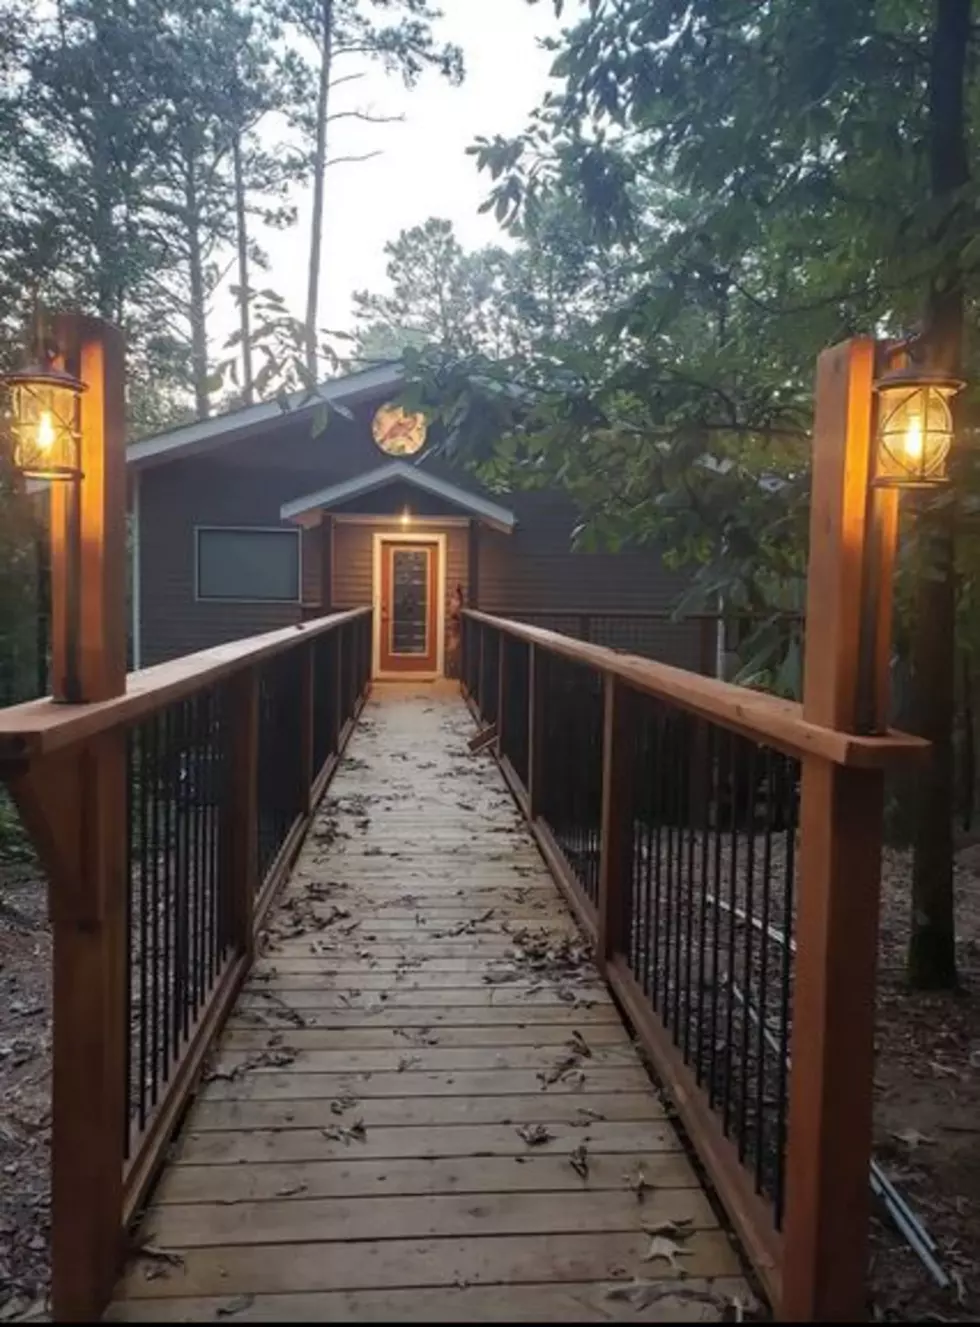 Stay in This Charming Treehouse Cabin in De Queen, Arkansas